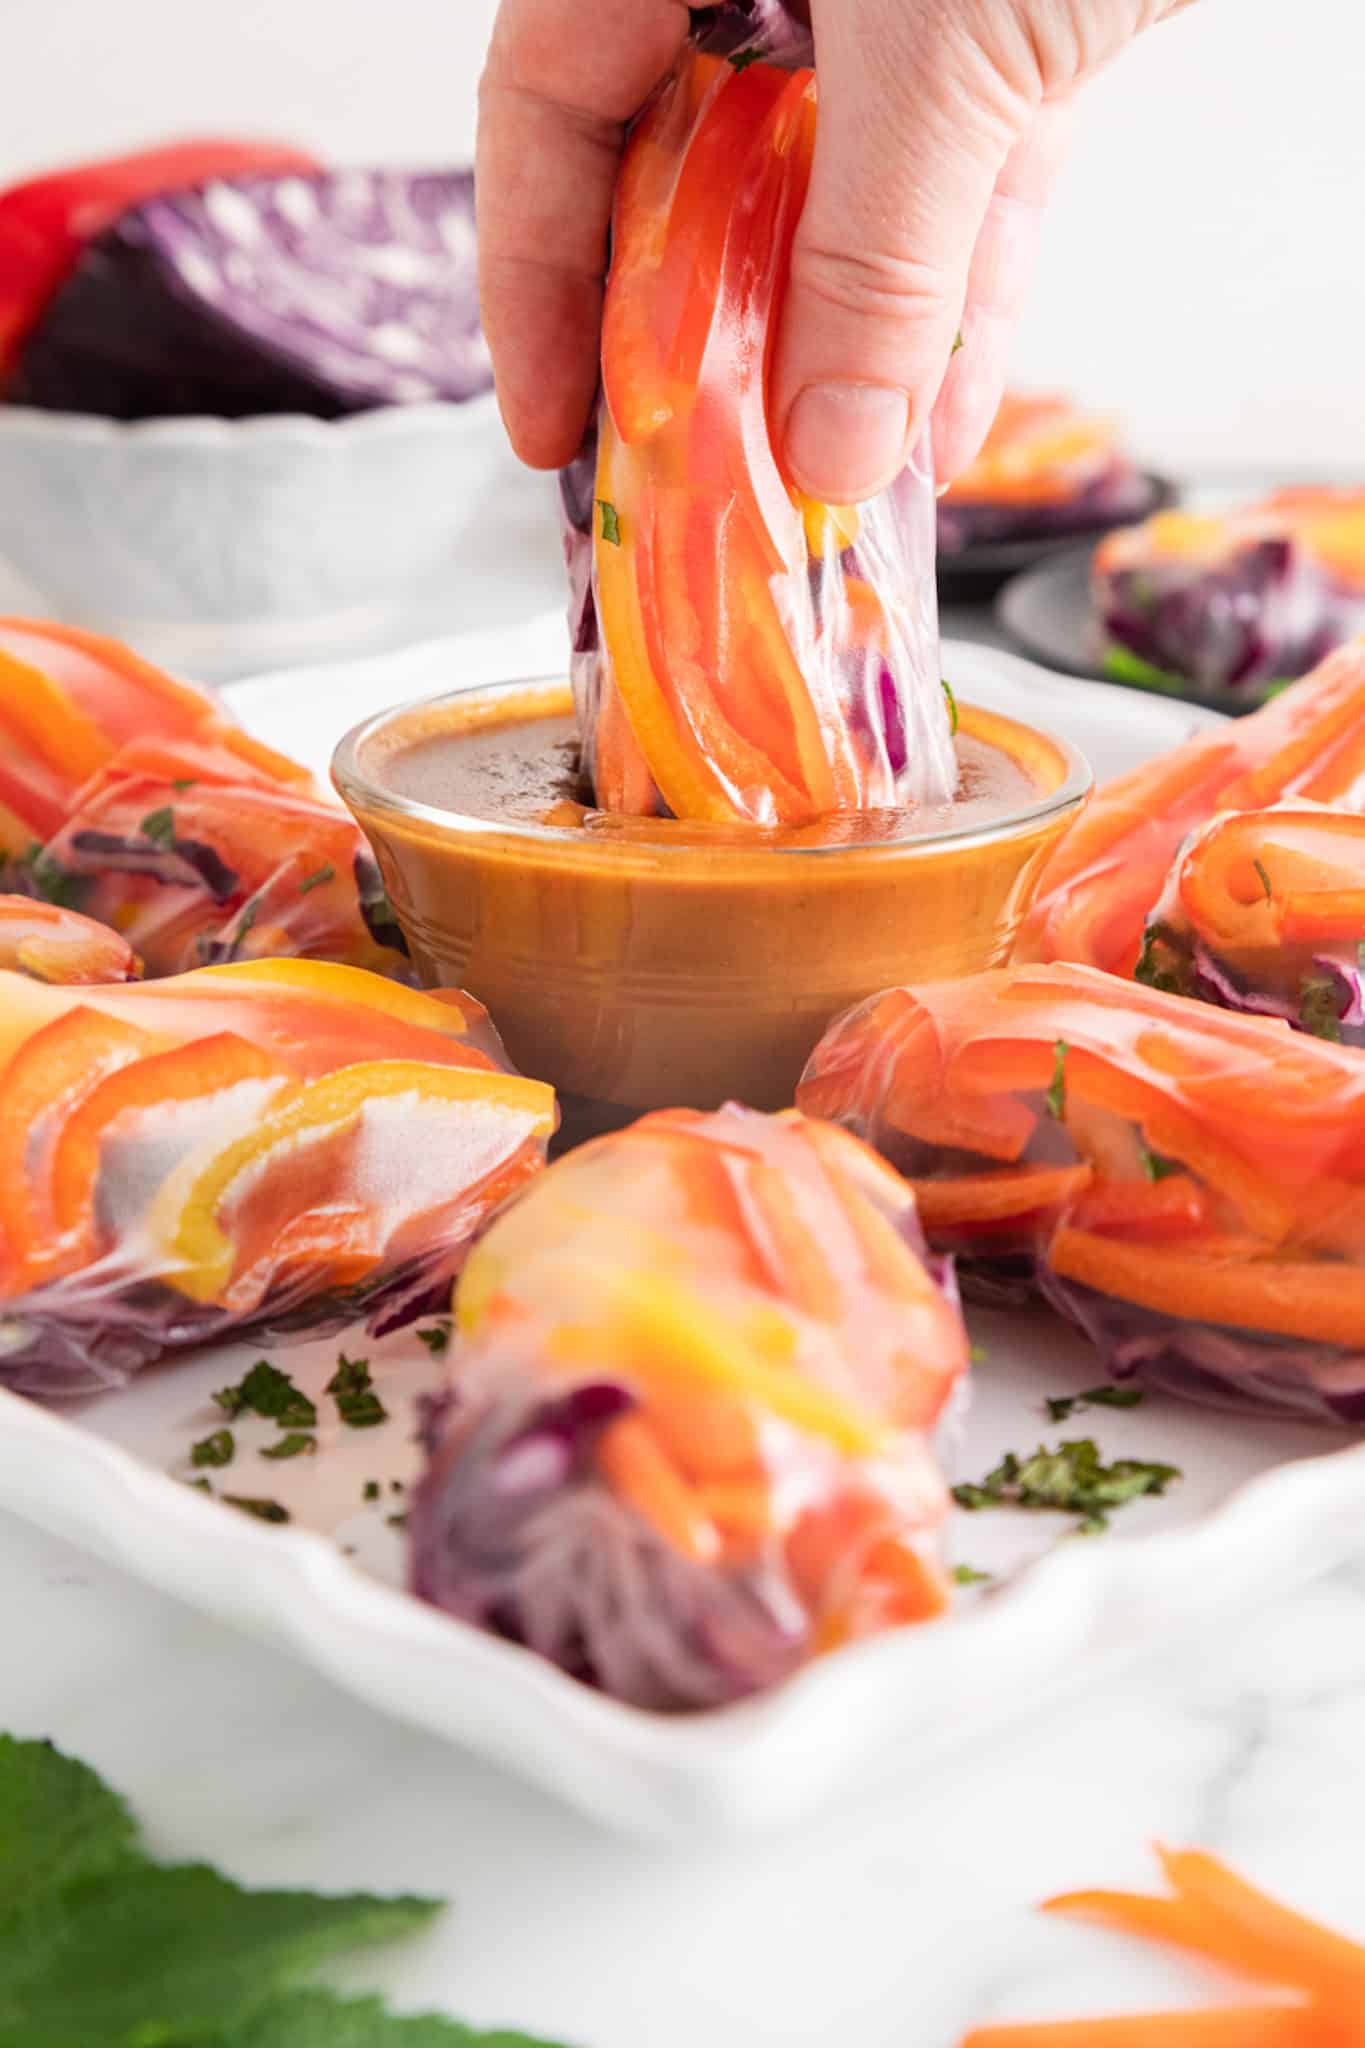 A vegan summer roll being dipped into a bowl of peanut sauce.